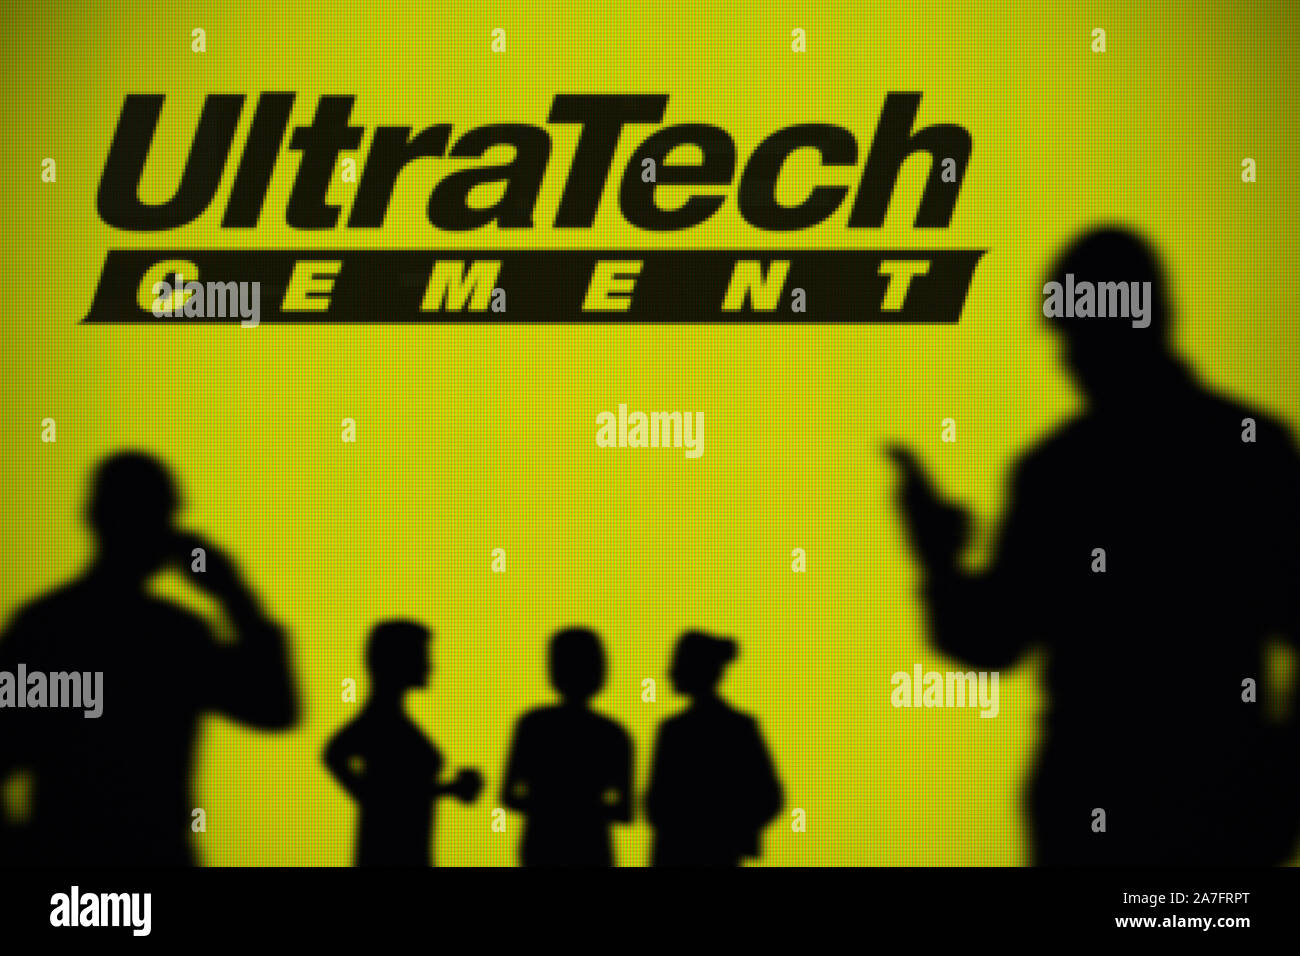 The UltraTech Cement logo is seen on an LED screen in the background while a silhouetted person uses a smartphone (Editorial use only) Stock Photo